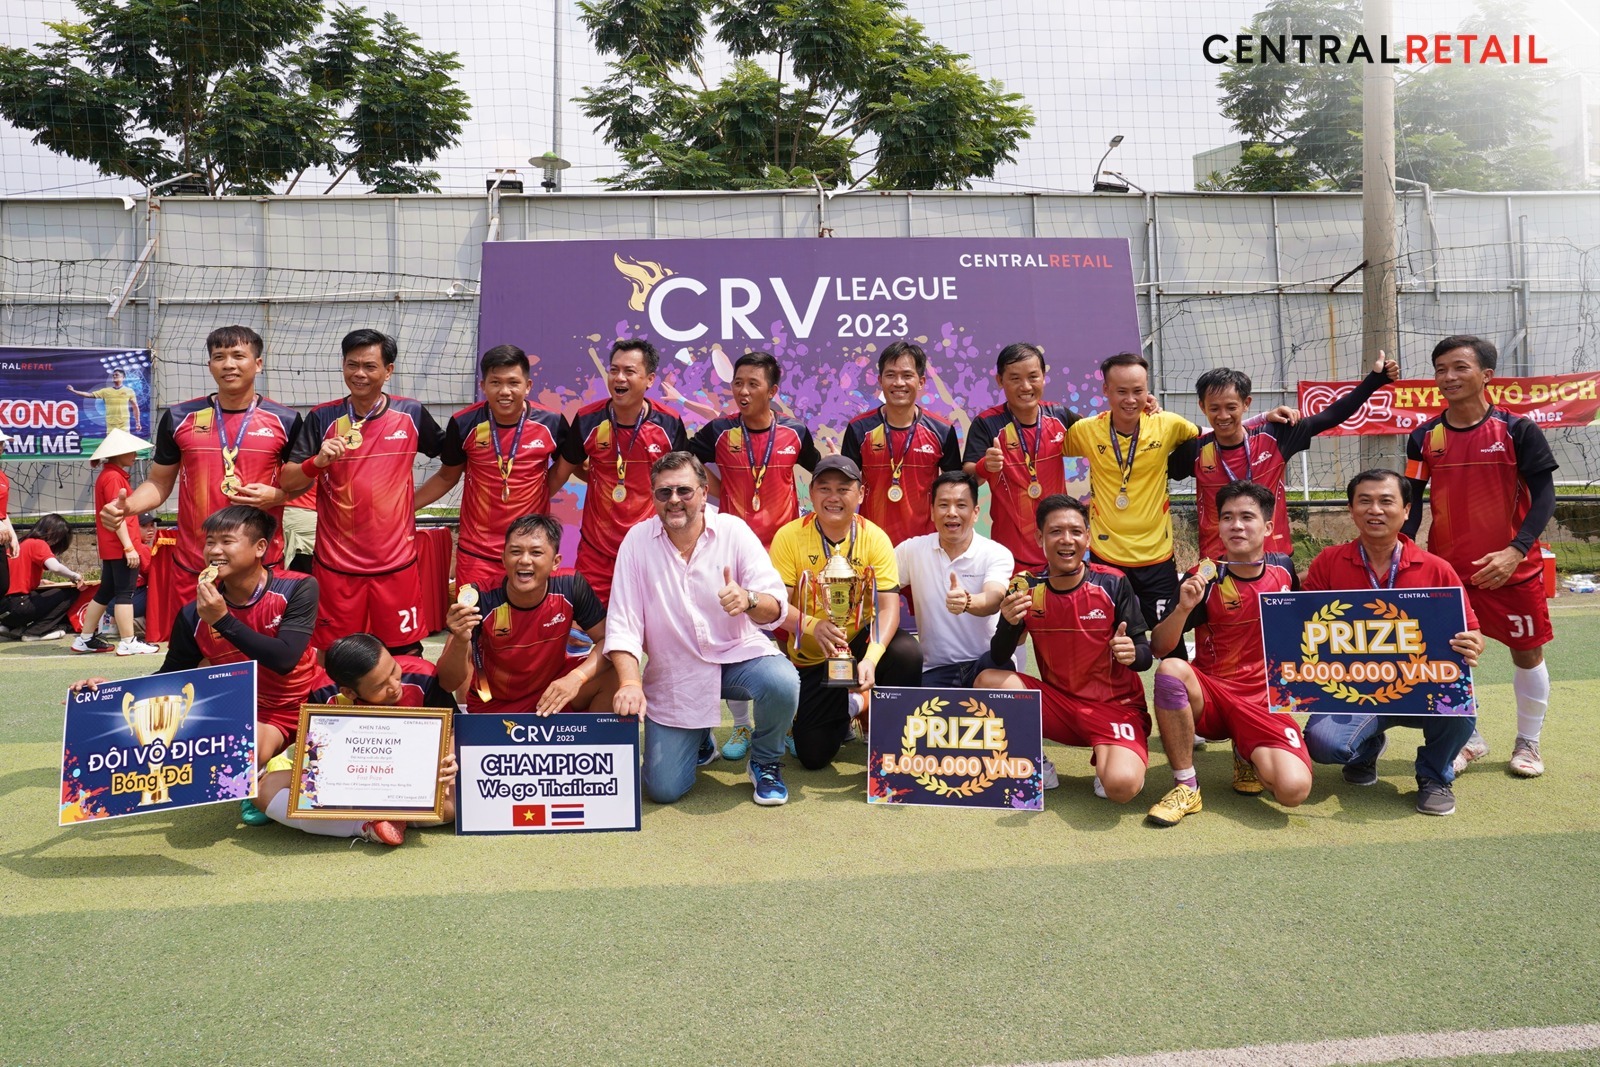 Central Retail organizes CRV League 2023 to create a healthy platform for employees to connect across the company’s business